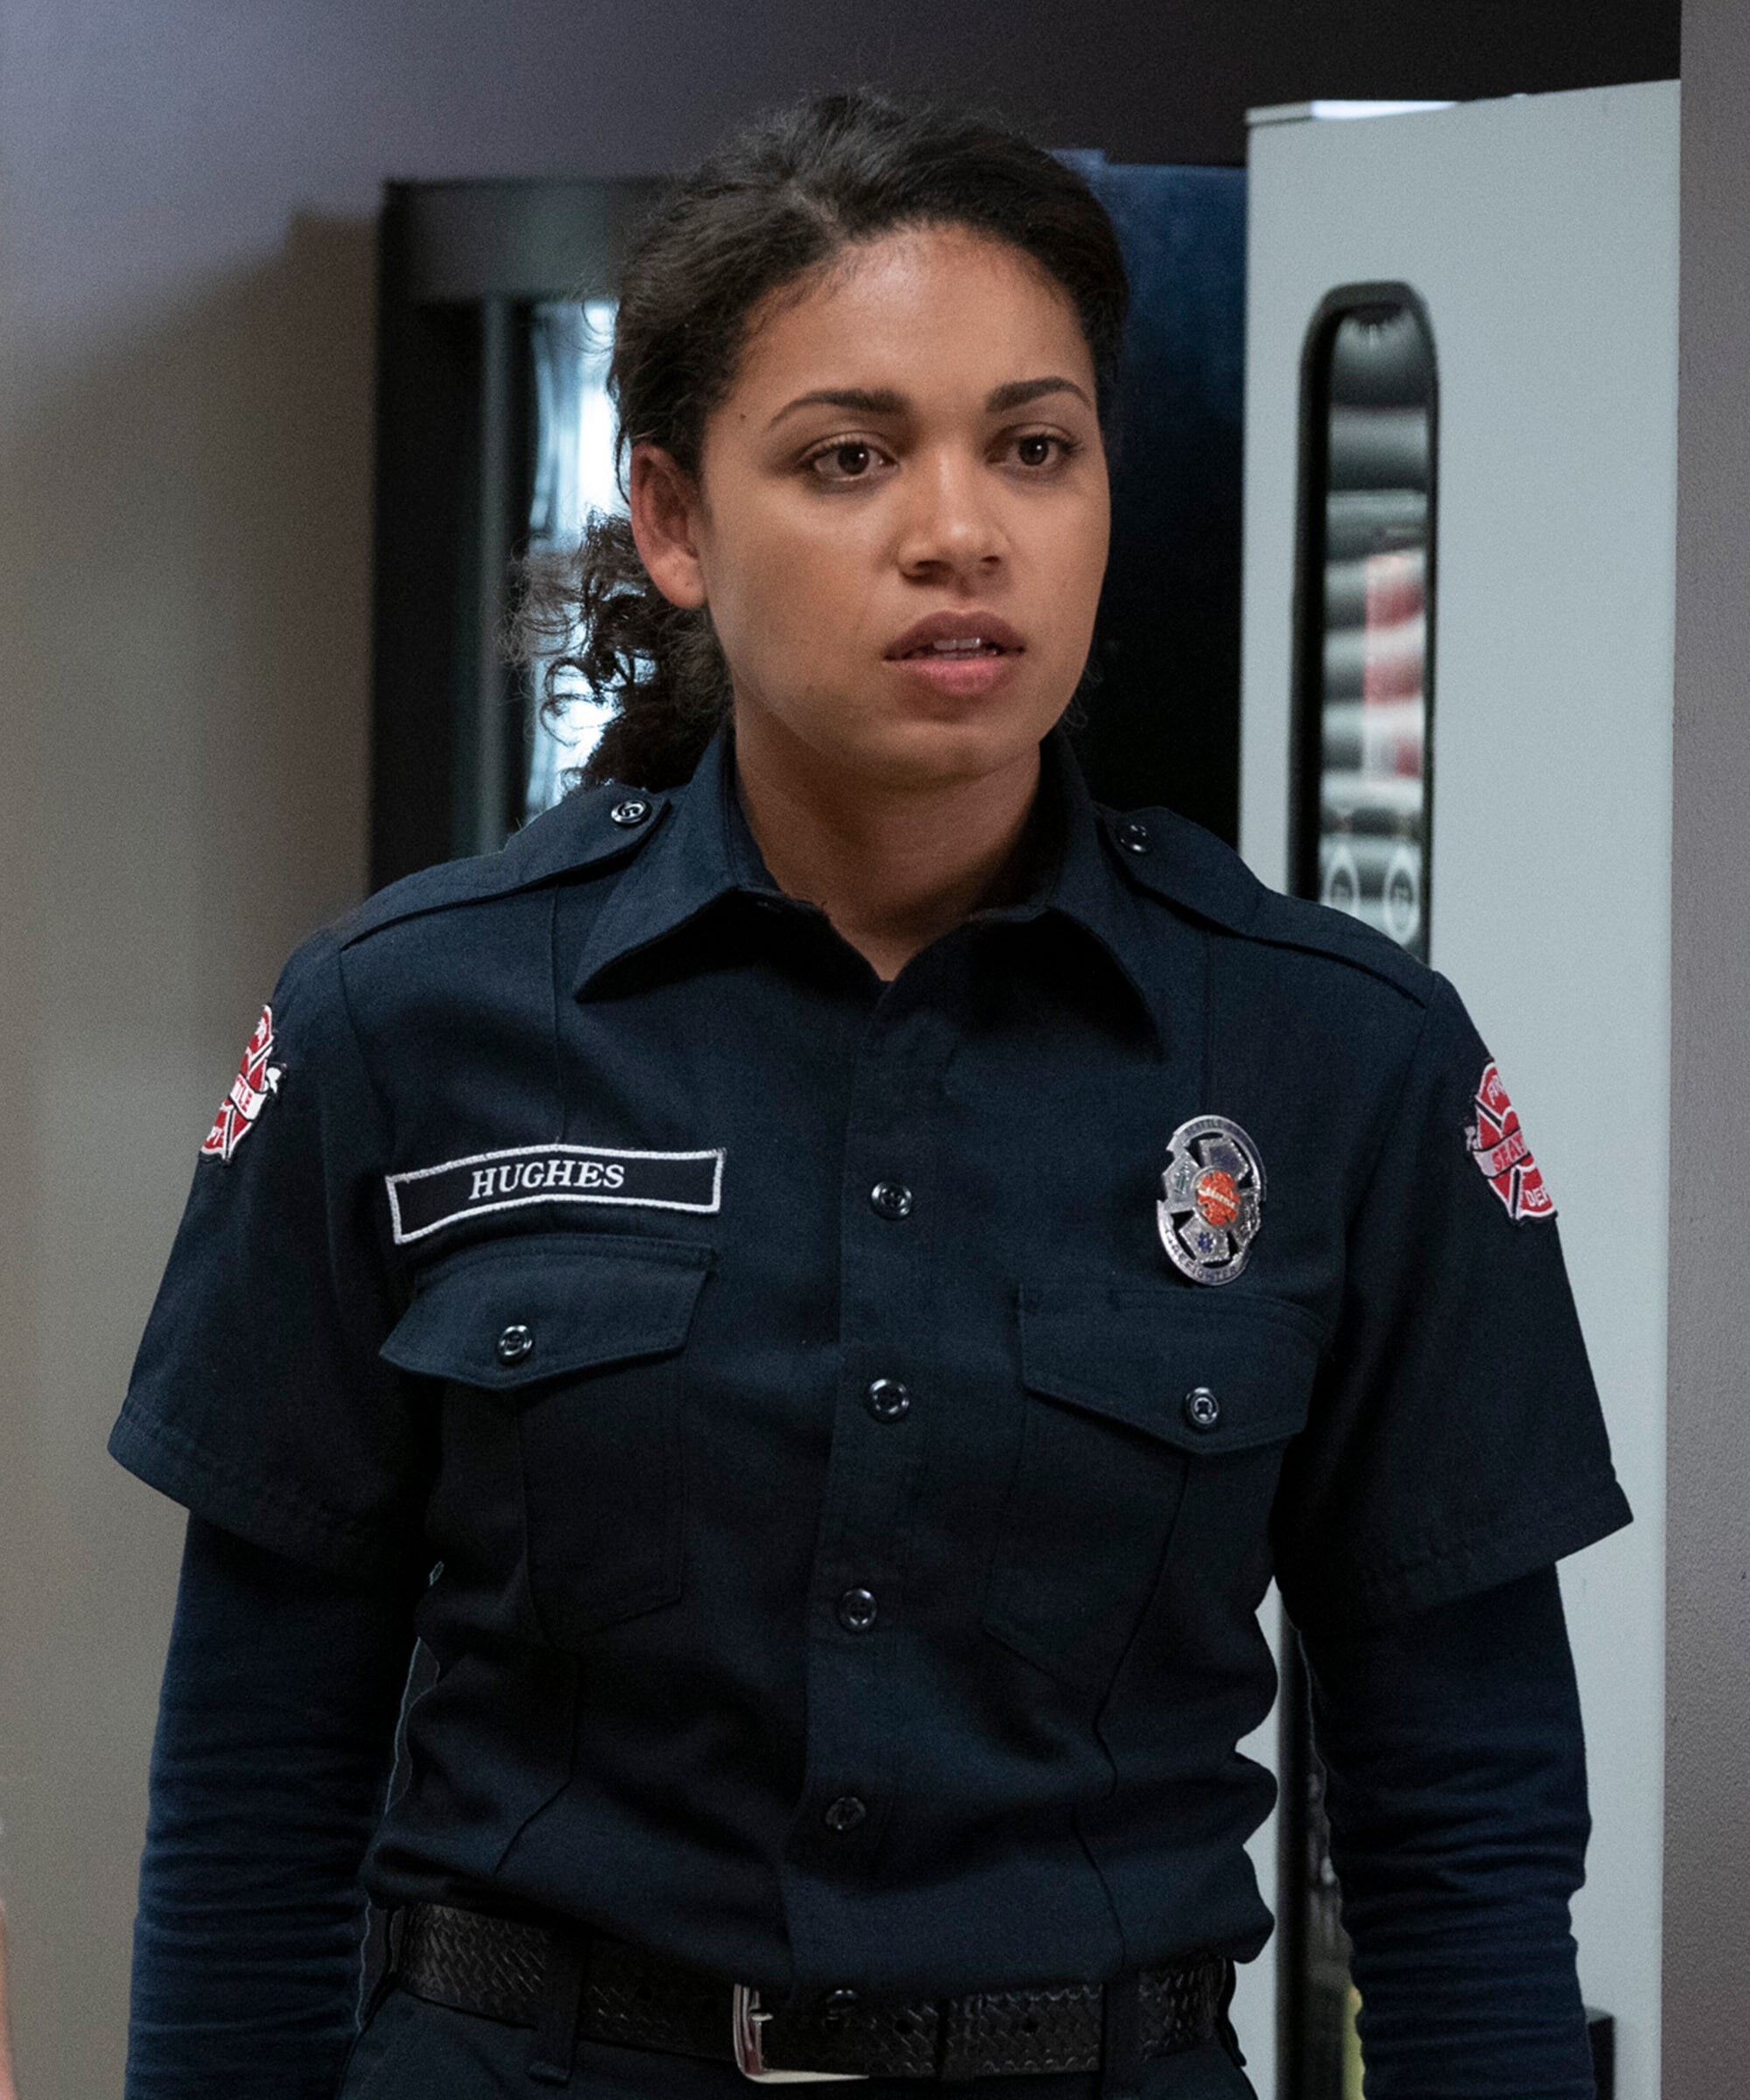 Station 19 (TV Series): Victoria "Vic" Hughes, Firefighter, Barrett Doss, American Actress And Singer. 2000x2400 HD Background.